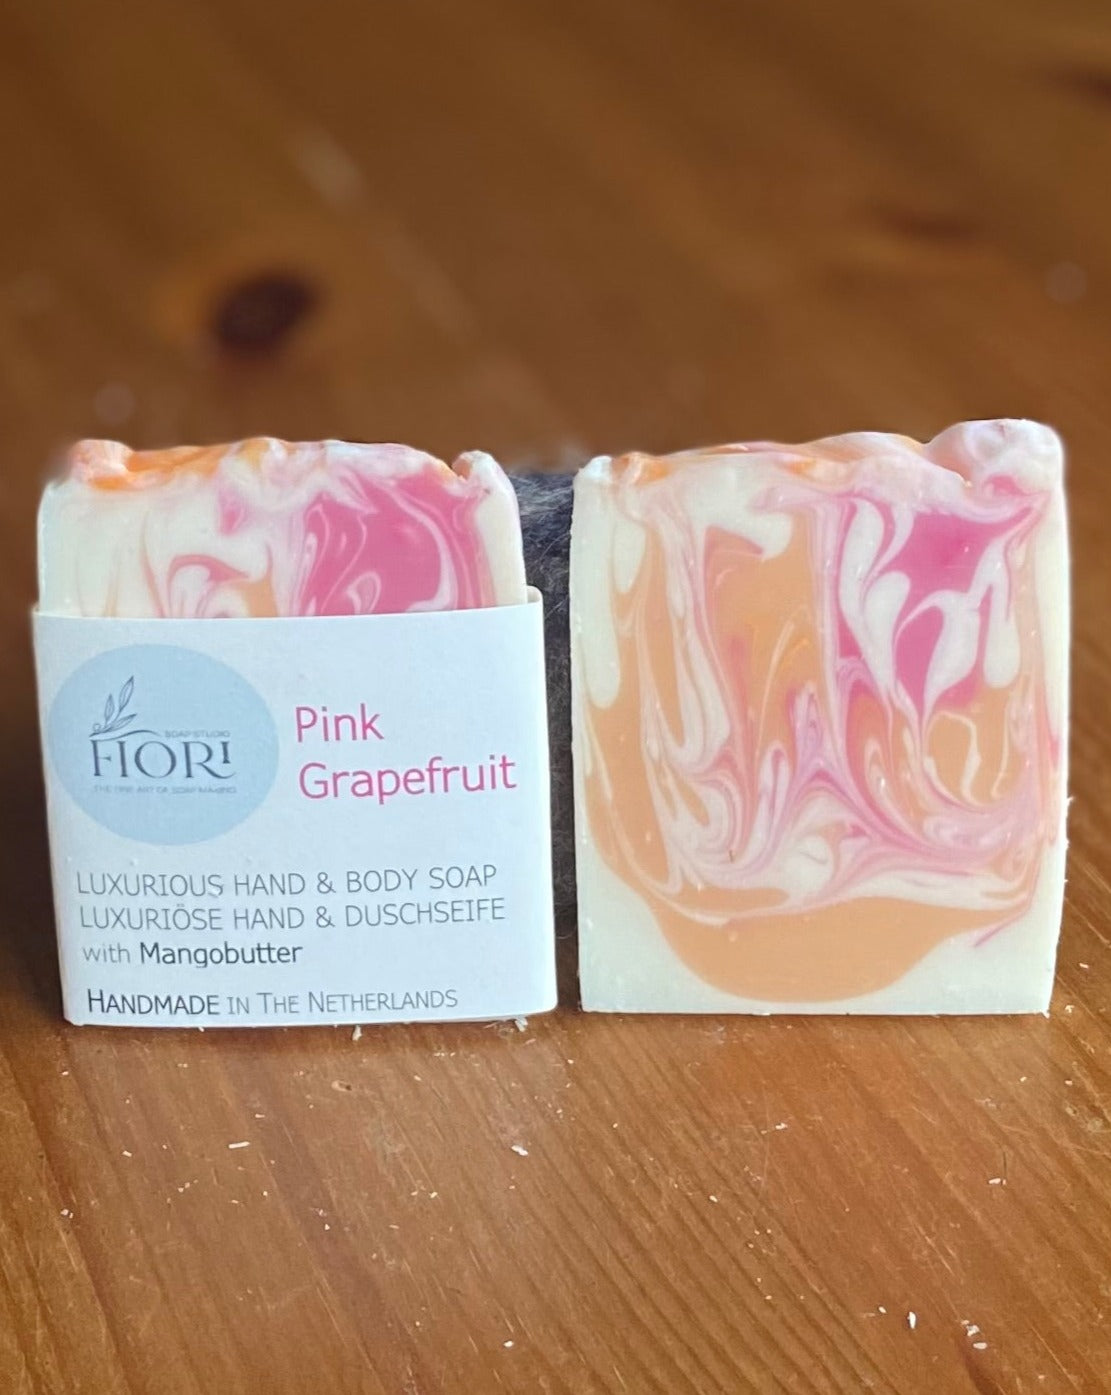 Handmade artisan soap travel size, moisturizing and gentle to the skin, sustainbale, palm oil free, 100% vegan and made with love.